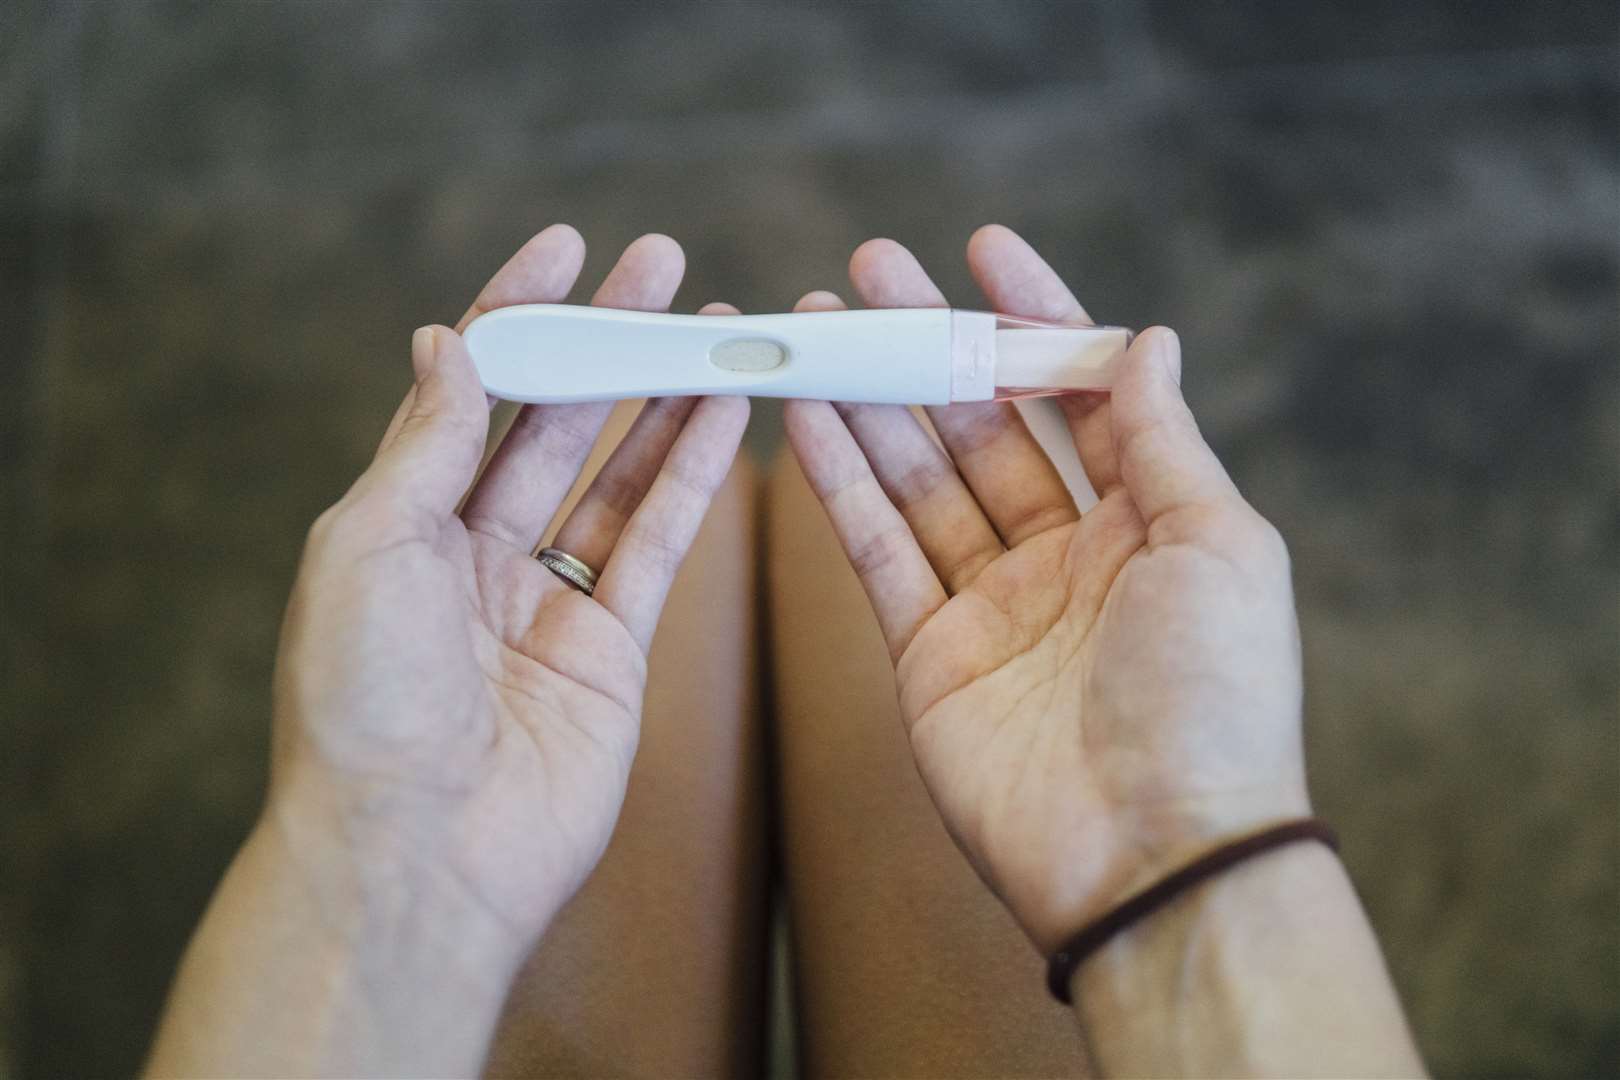 Home testing kits are giving women the results they need